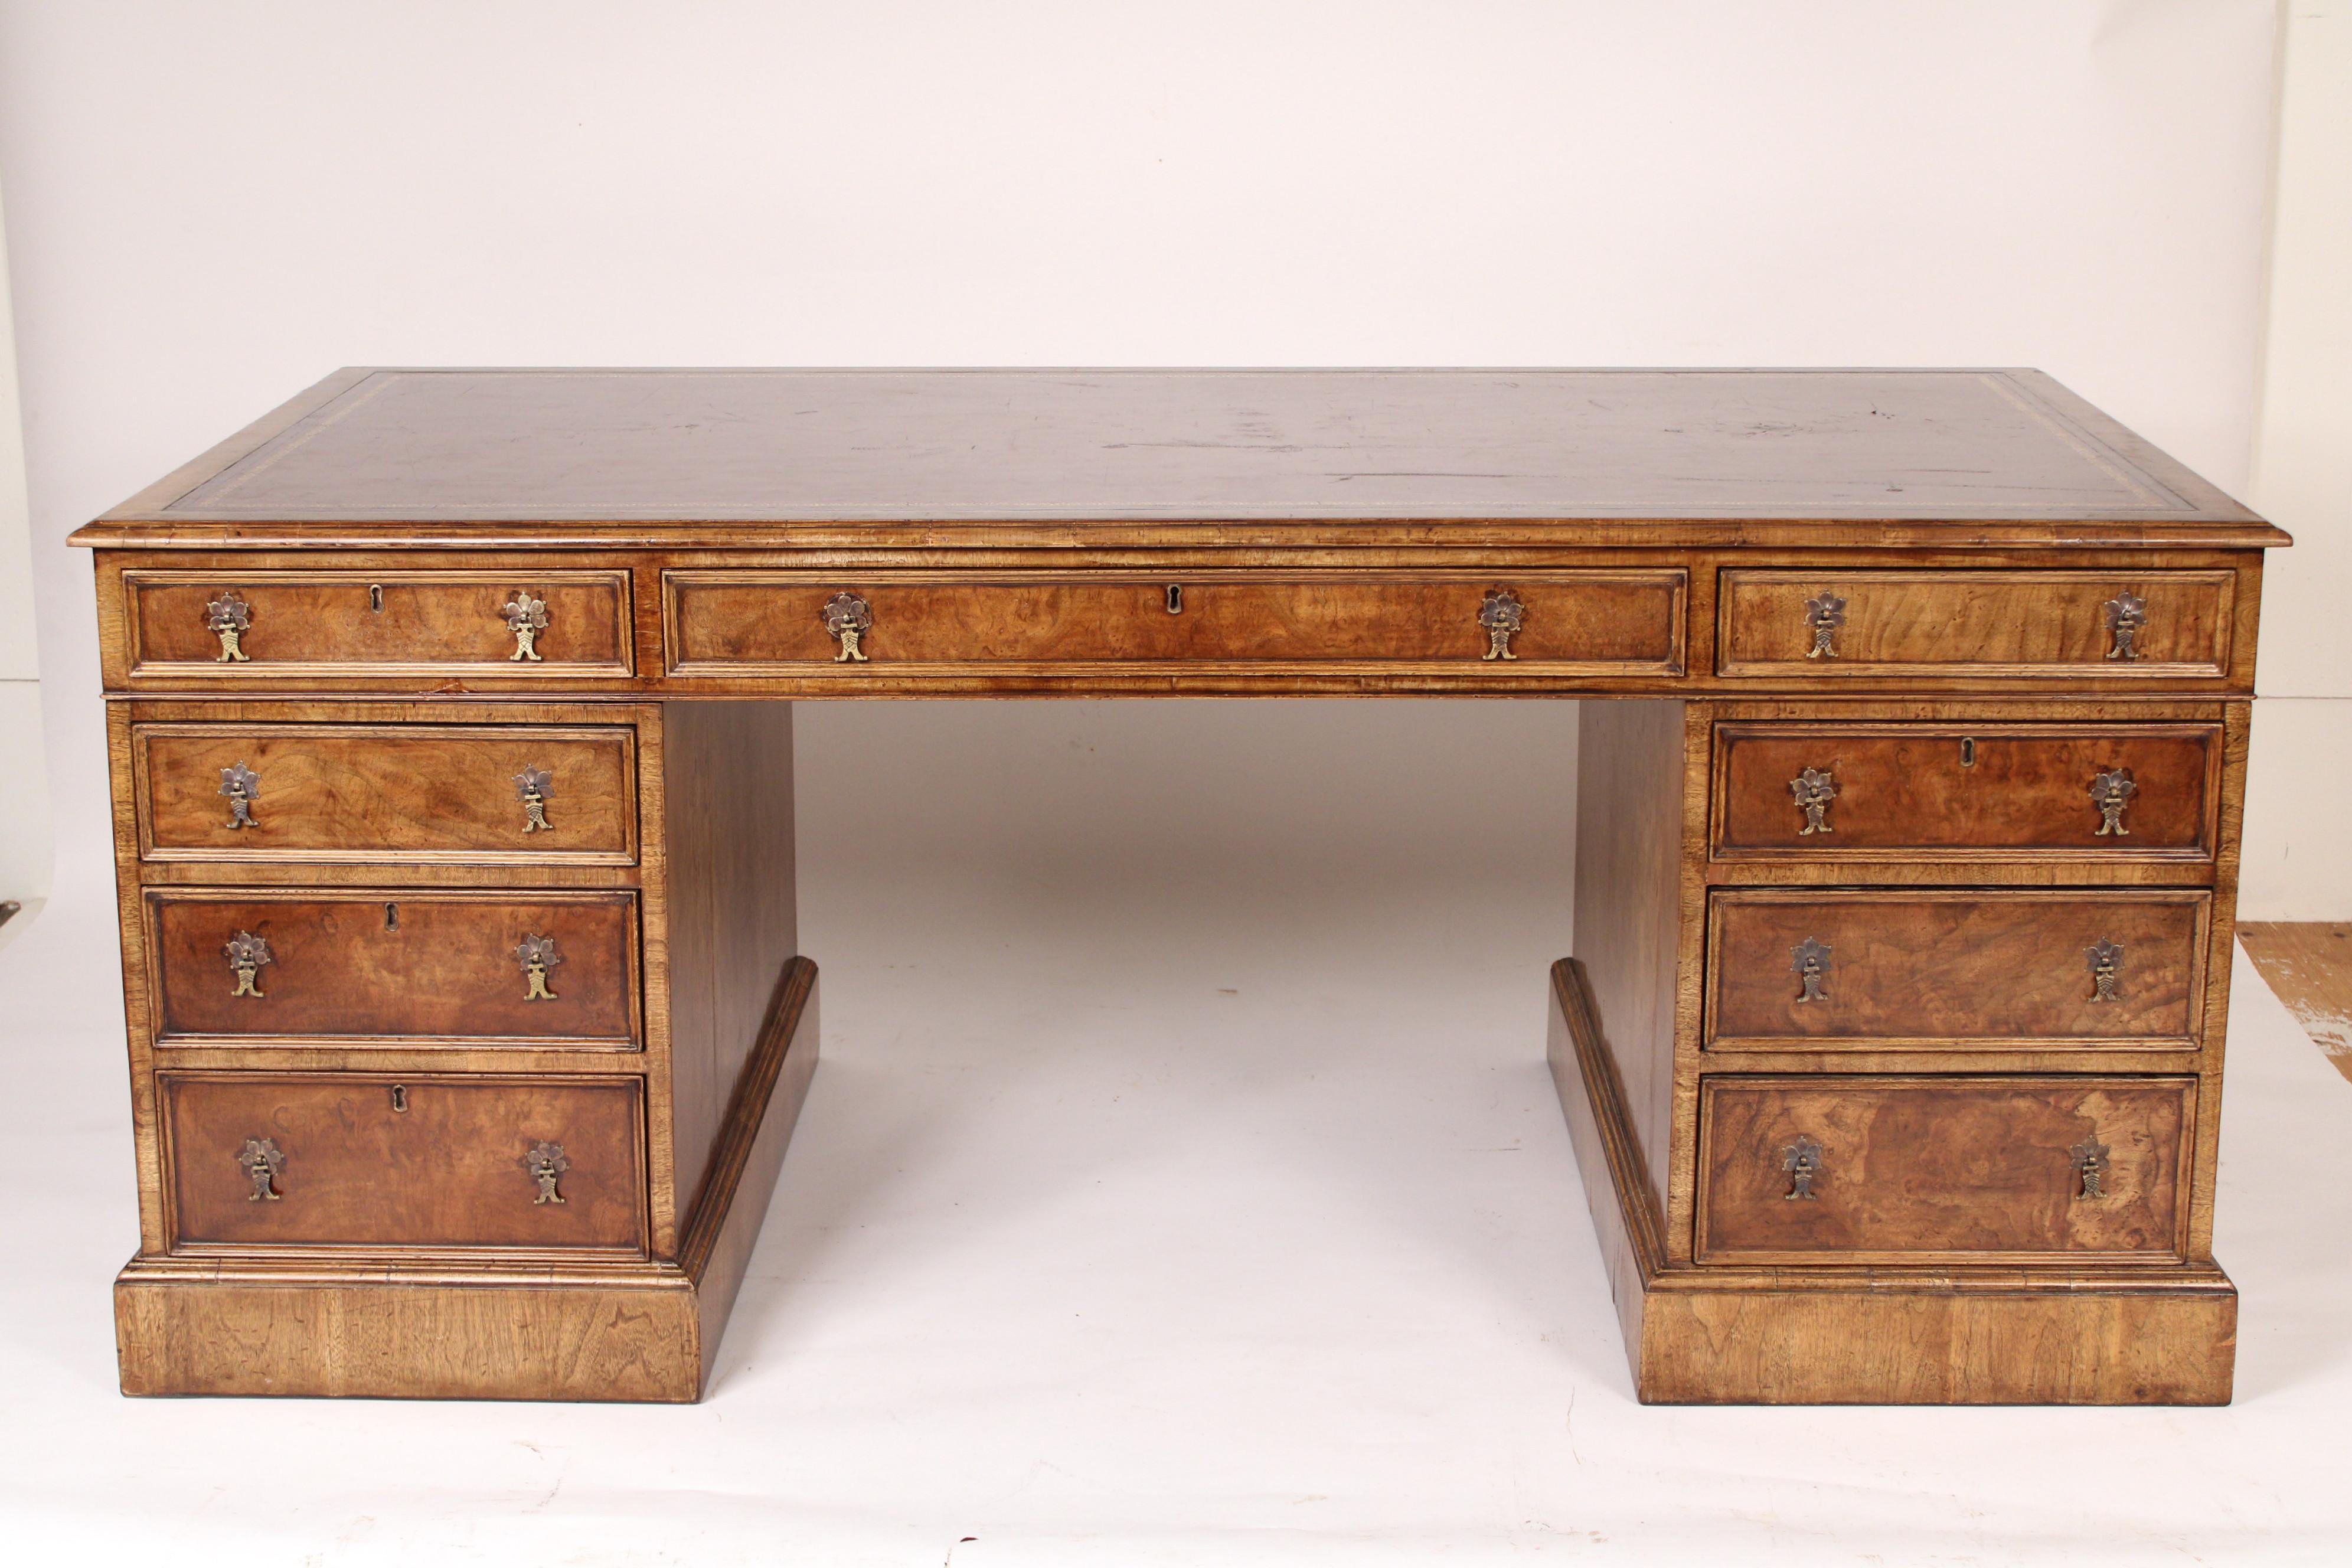 George II style burl walnut double pedestal partners desk with a tooled leather top, made by Burton Chang, circa late 20th century. With a red tooled leather overhanging top, 3 burl walnut frieze drawers on front and back sides, two burl walnut